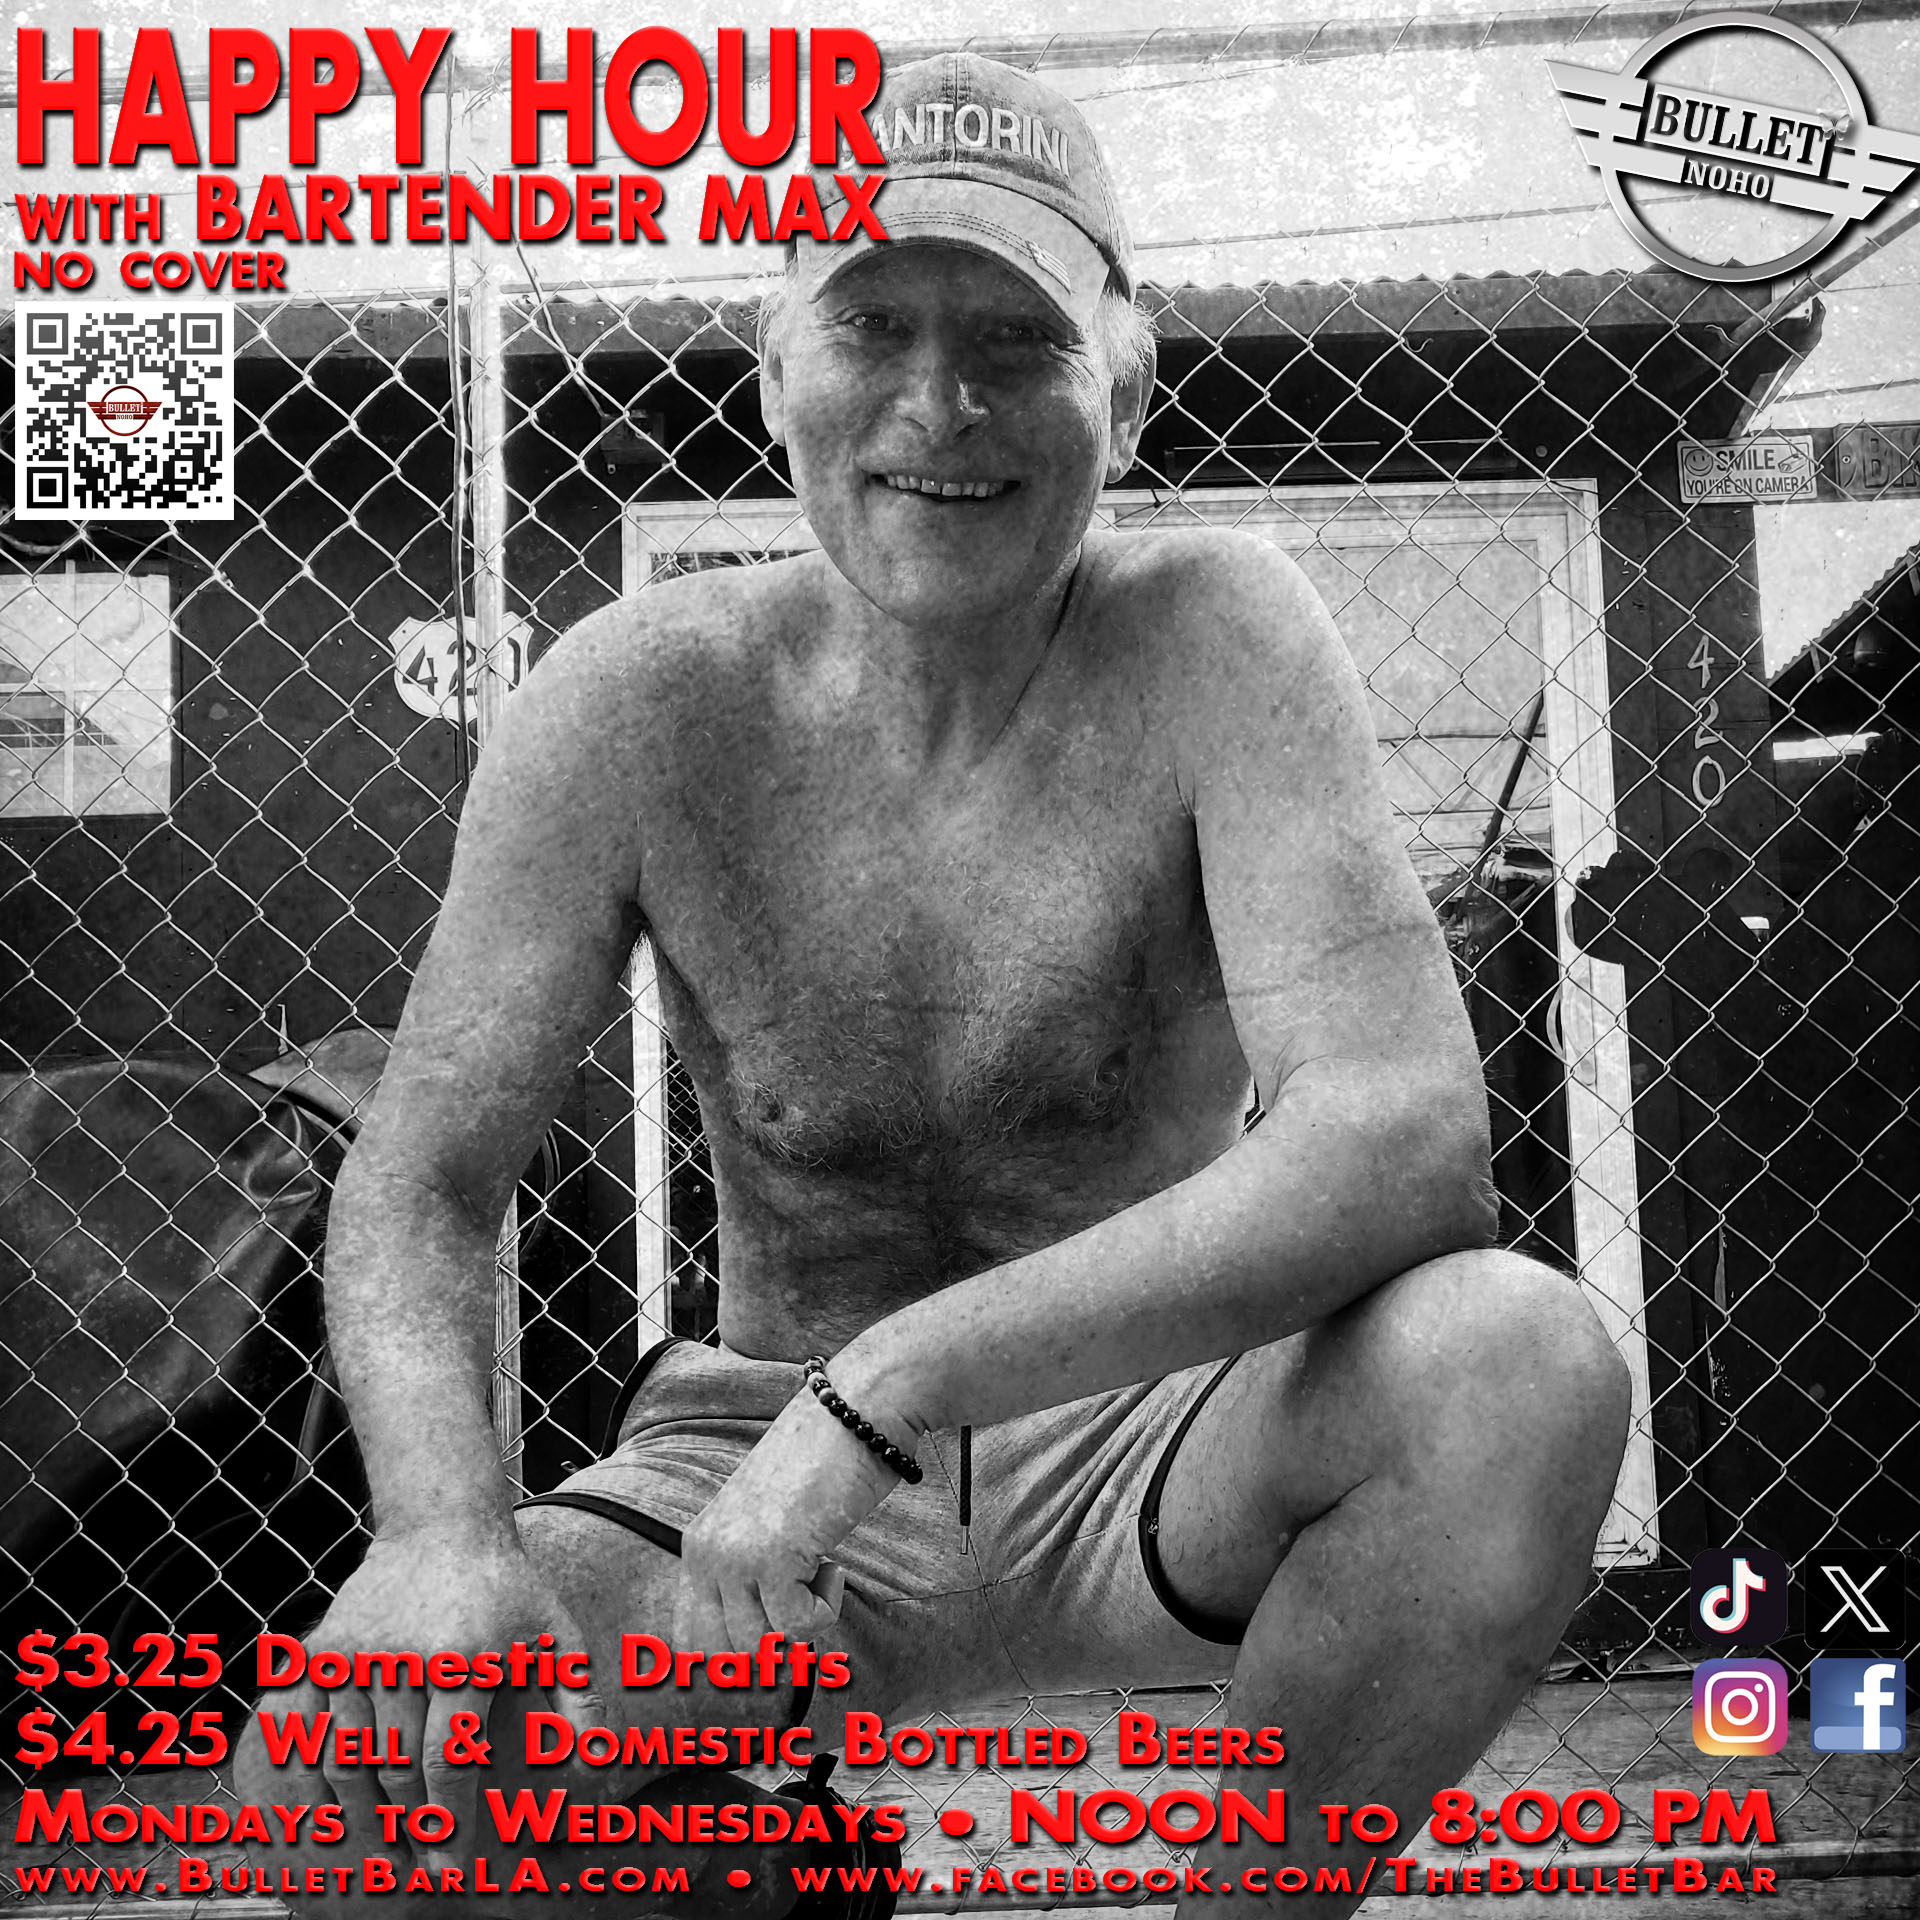 The Bullet Bar: Happy Hour with MAX! All Well Drinks and Domestic Bottled Beers $4.25, Domestic Drafts $3.25. Monday thru Wednesday, Noon to 8:00 PM.